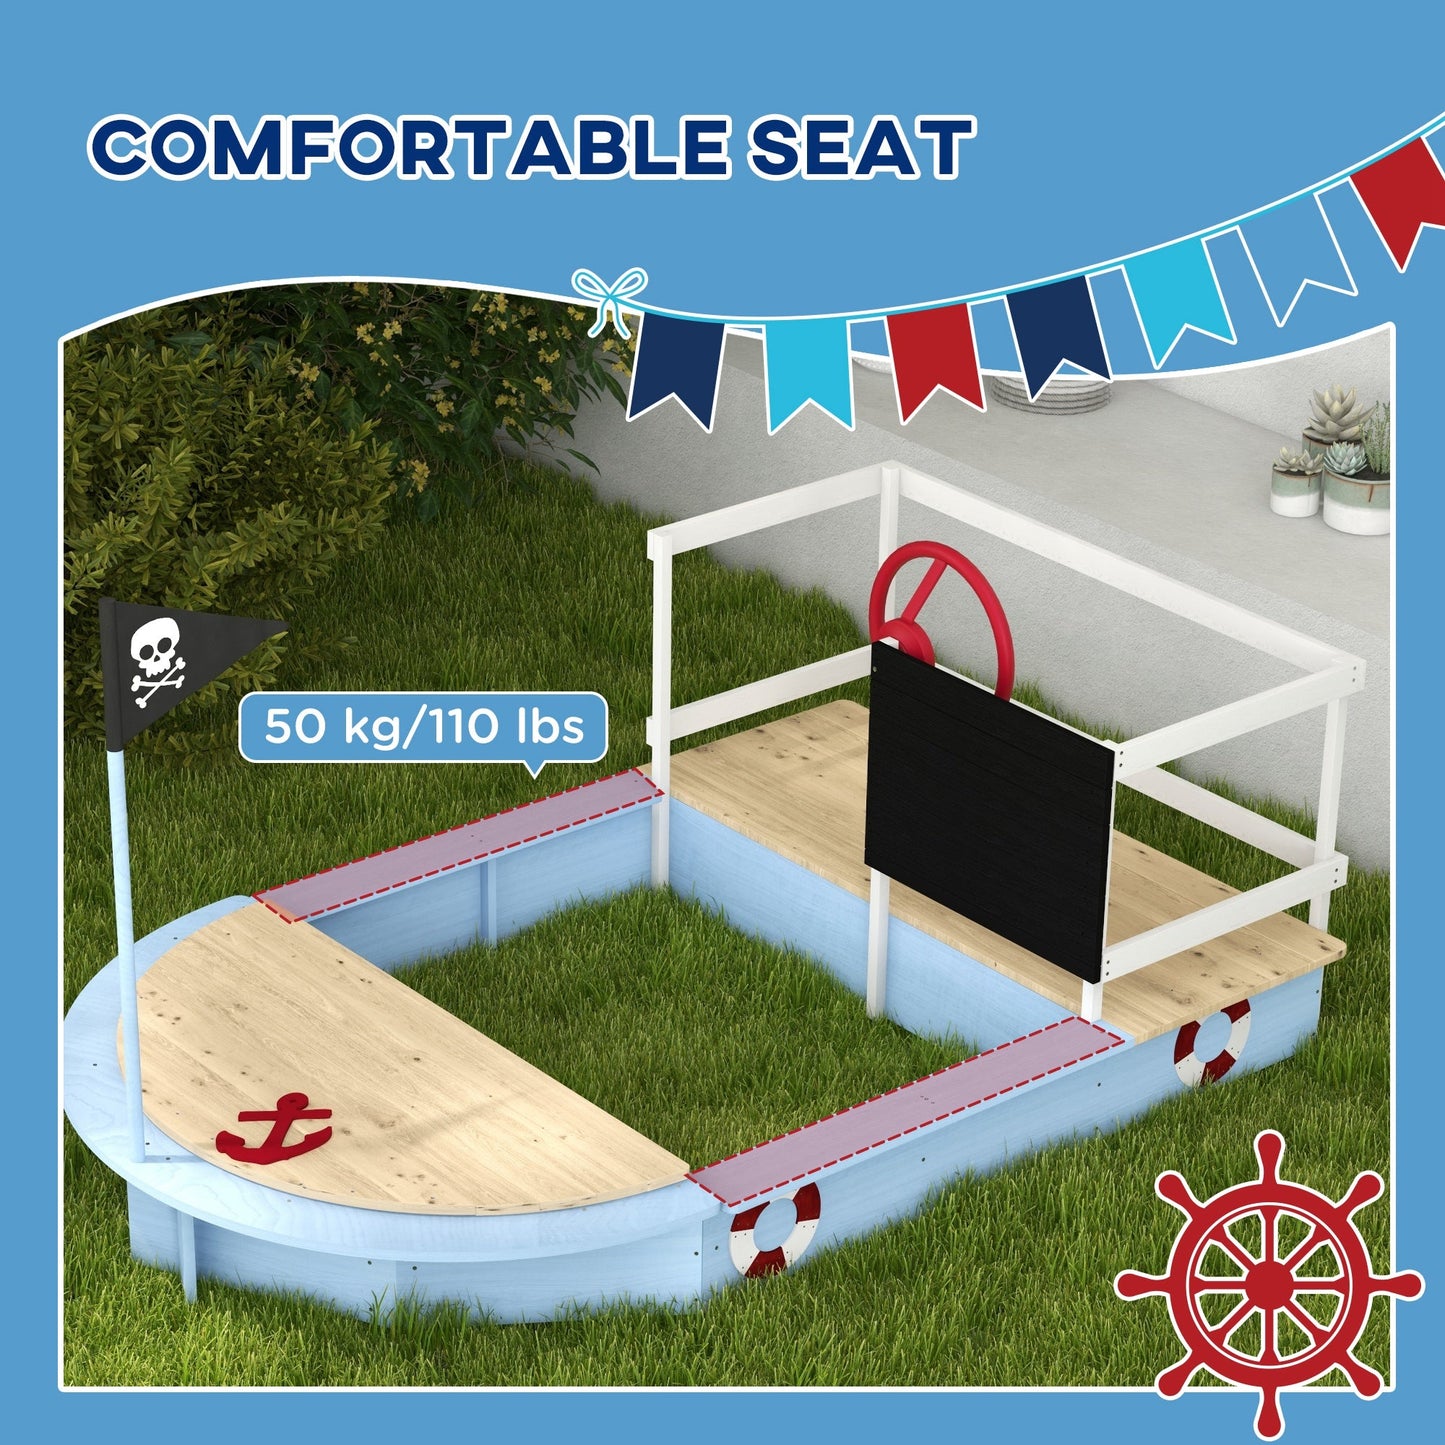 -Outsunny Wooden Sandbox with Pirate Ship Design for 3-7 Years, Blue - Outdoor Style Company